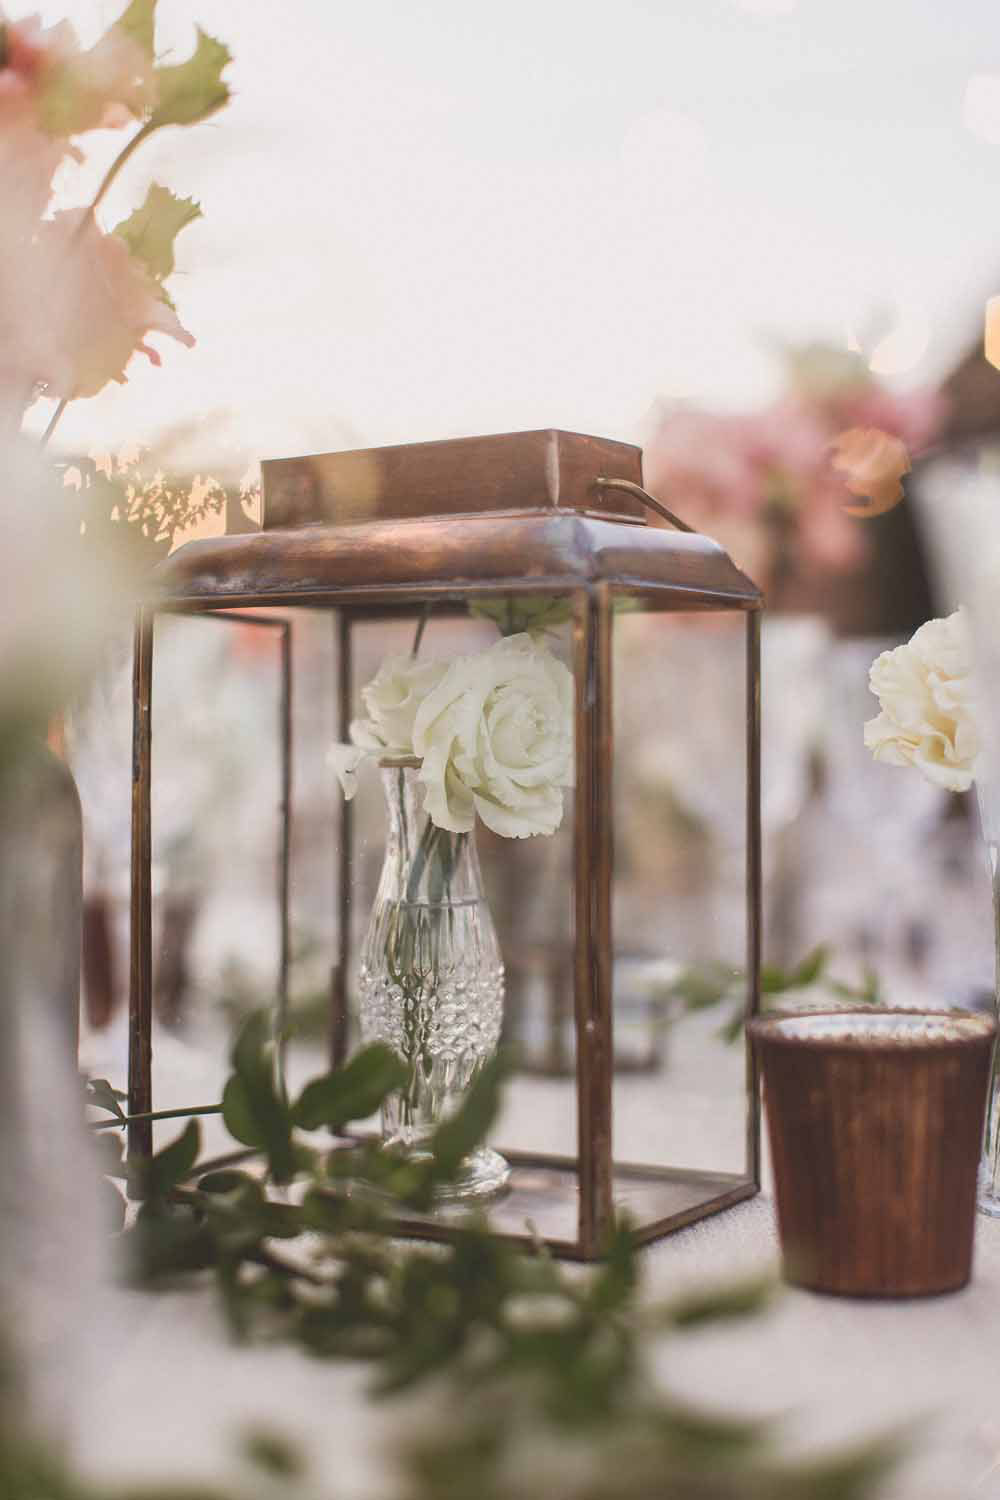 Brass lanterns with small bud vases inside wedding centrepieces